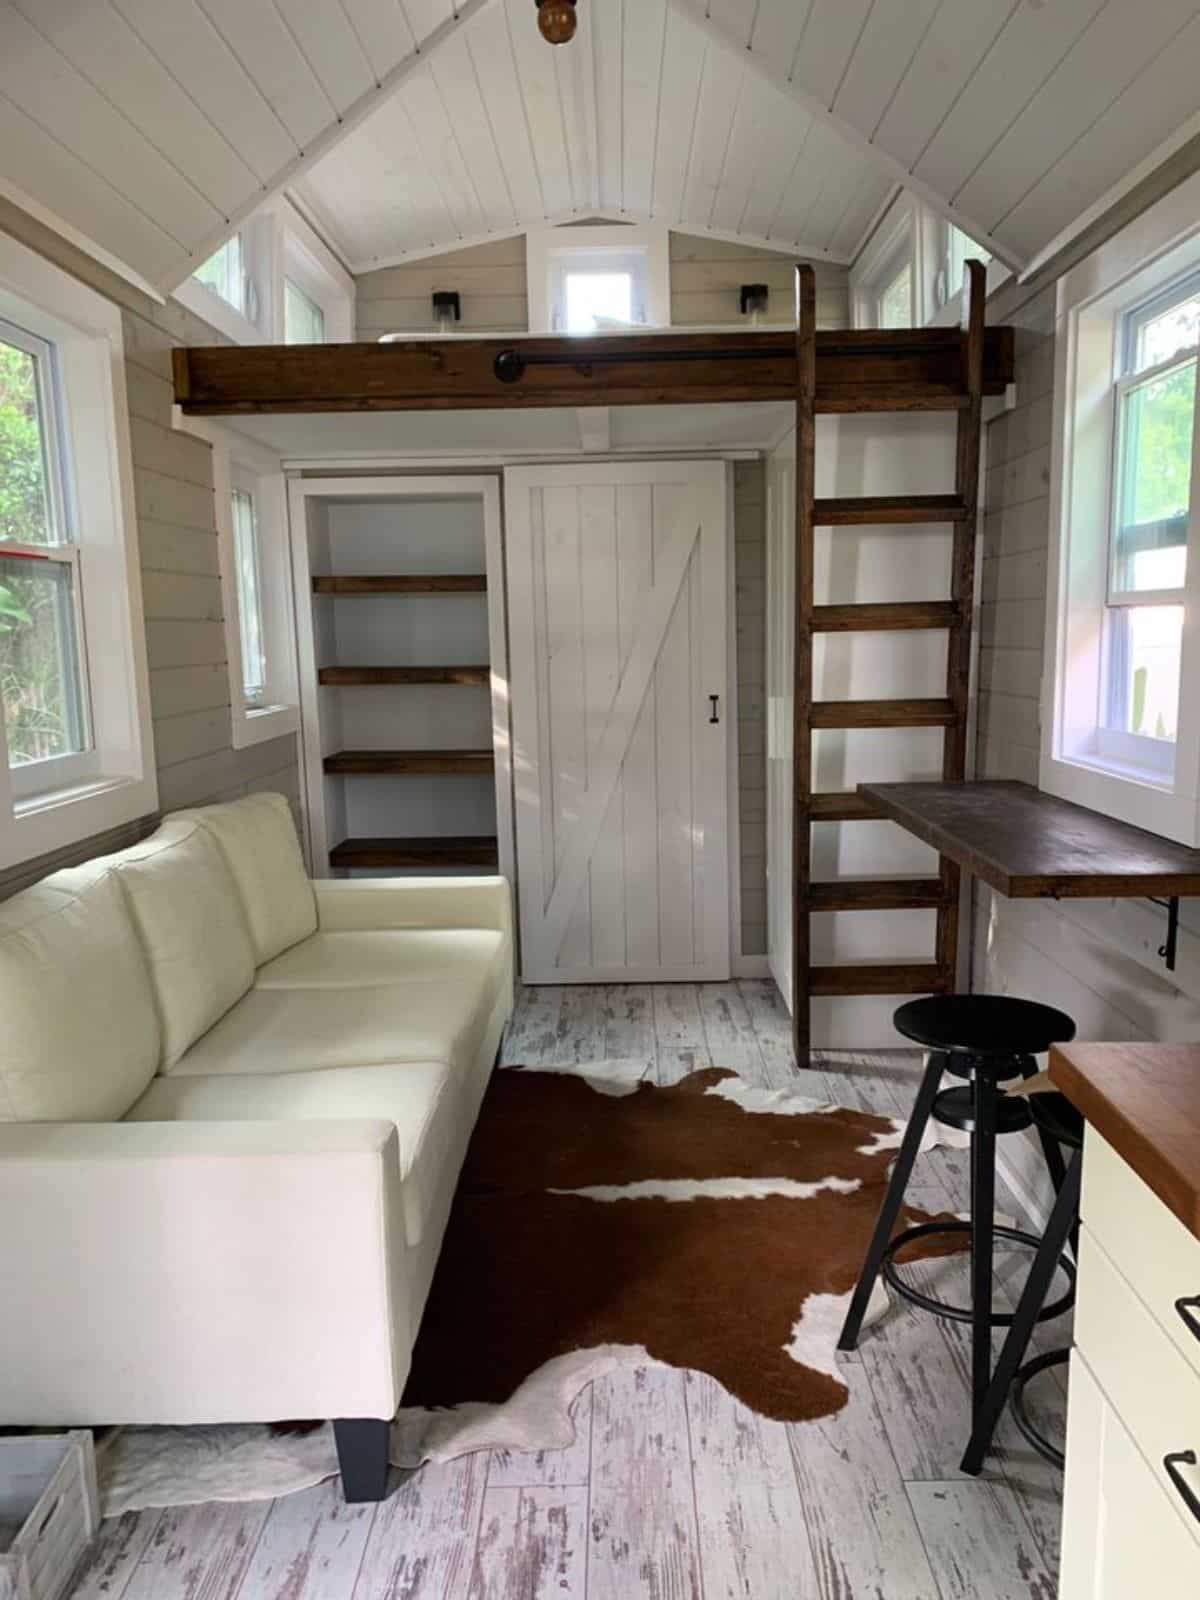 living area has a couch besides another window of furnished tiny home